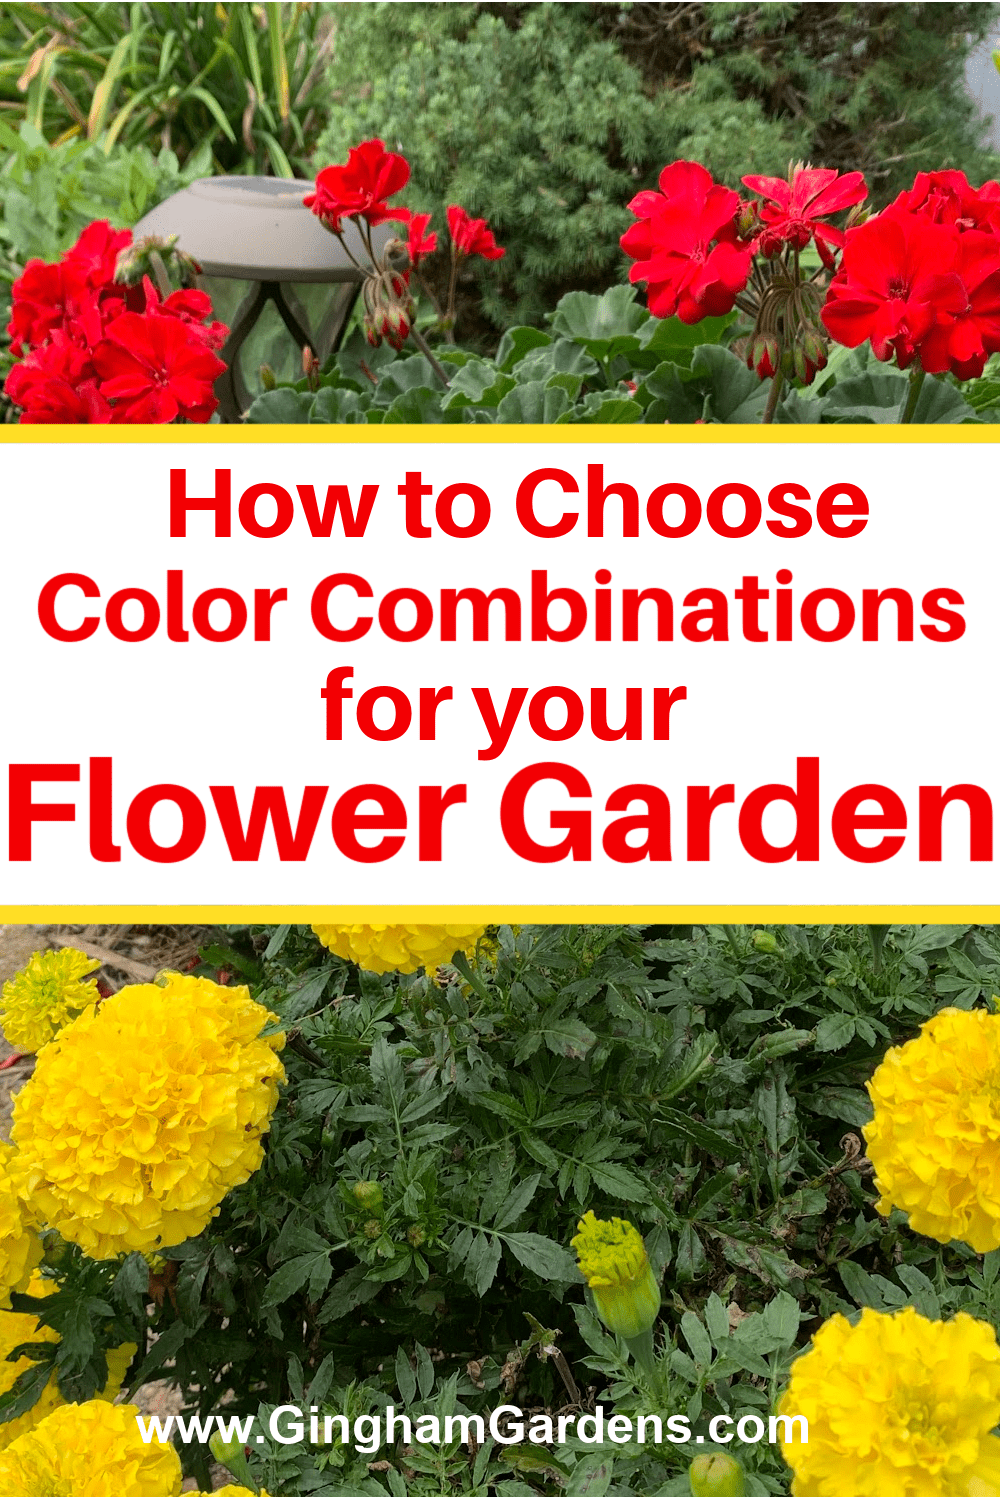 Image of red geraniums and yellow marigolds with text overlay - How to Choose winning Color Combinations for a Flower Garden